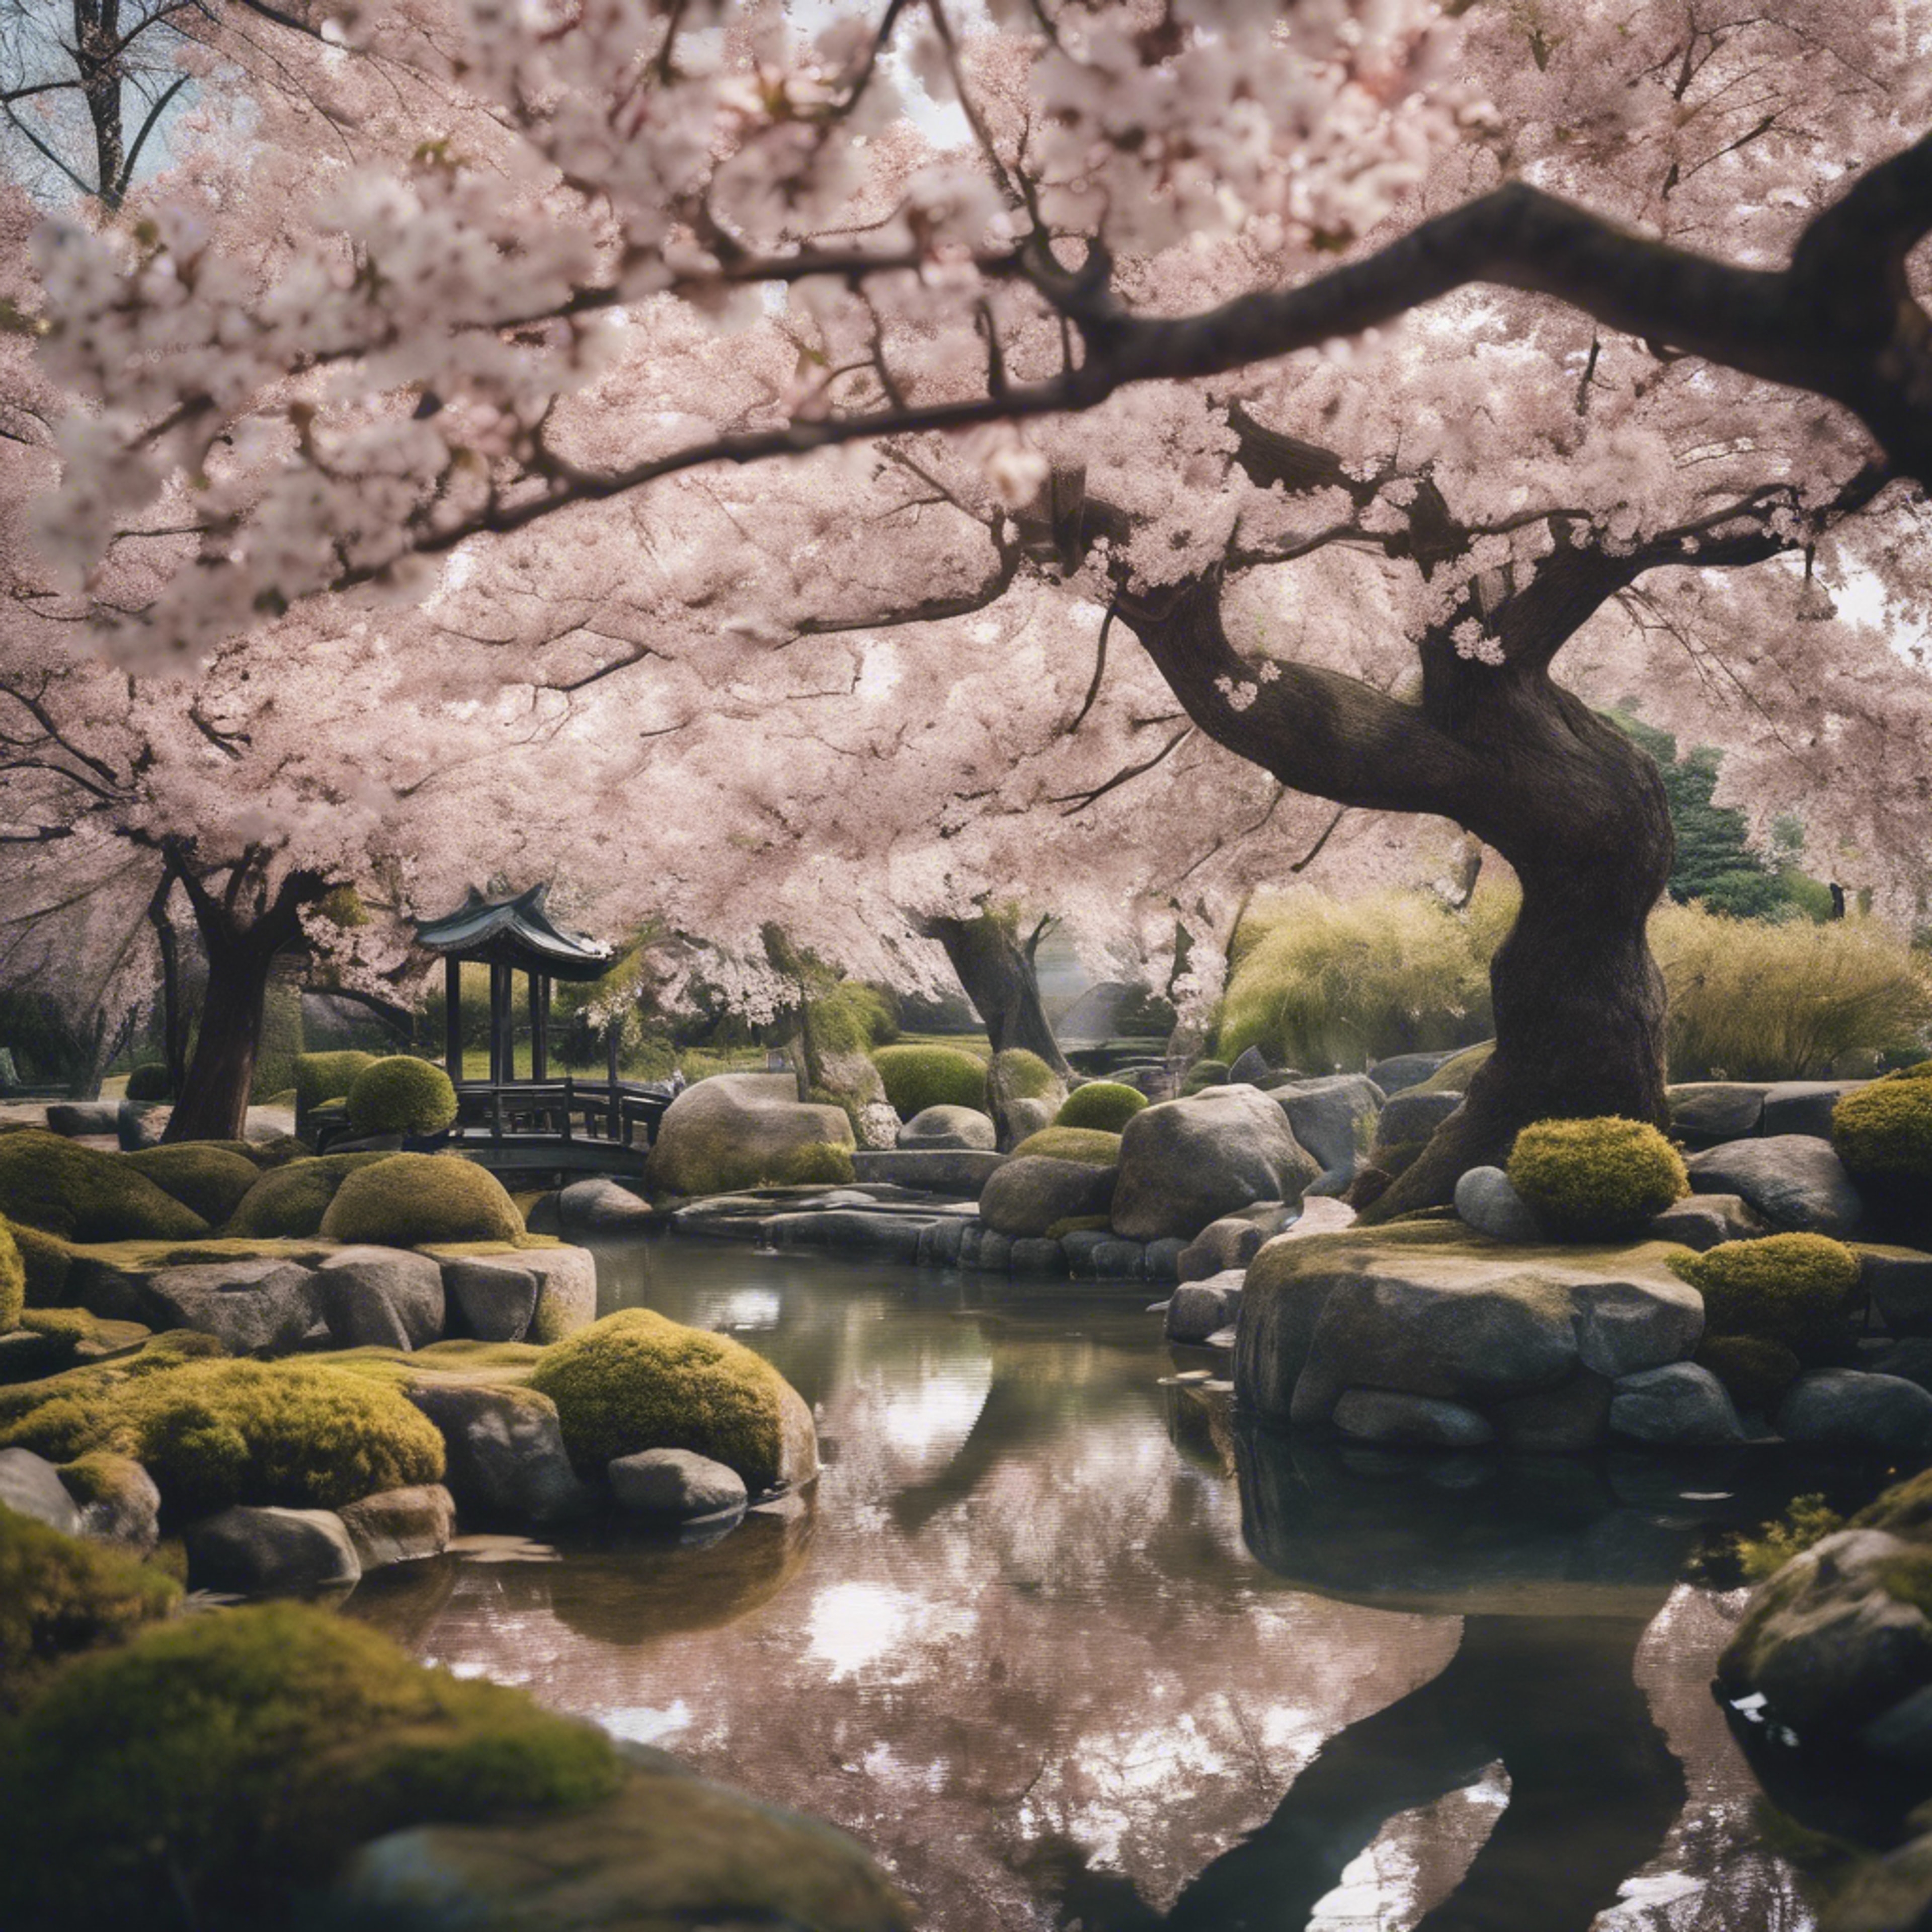 A wide-angle view of a serene Japanese garden with cherry blossoms in full bloom. Tapéta[cf6d4e9694a4479cb5ff]